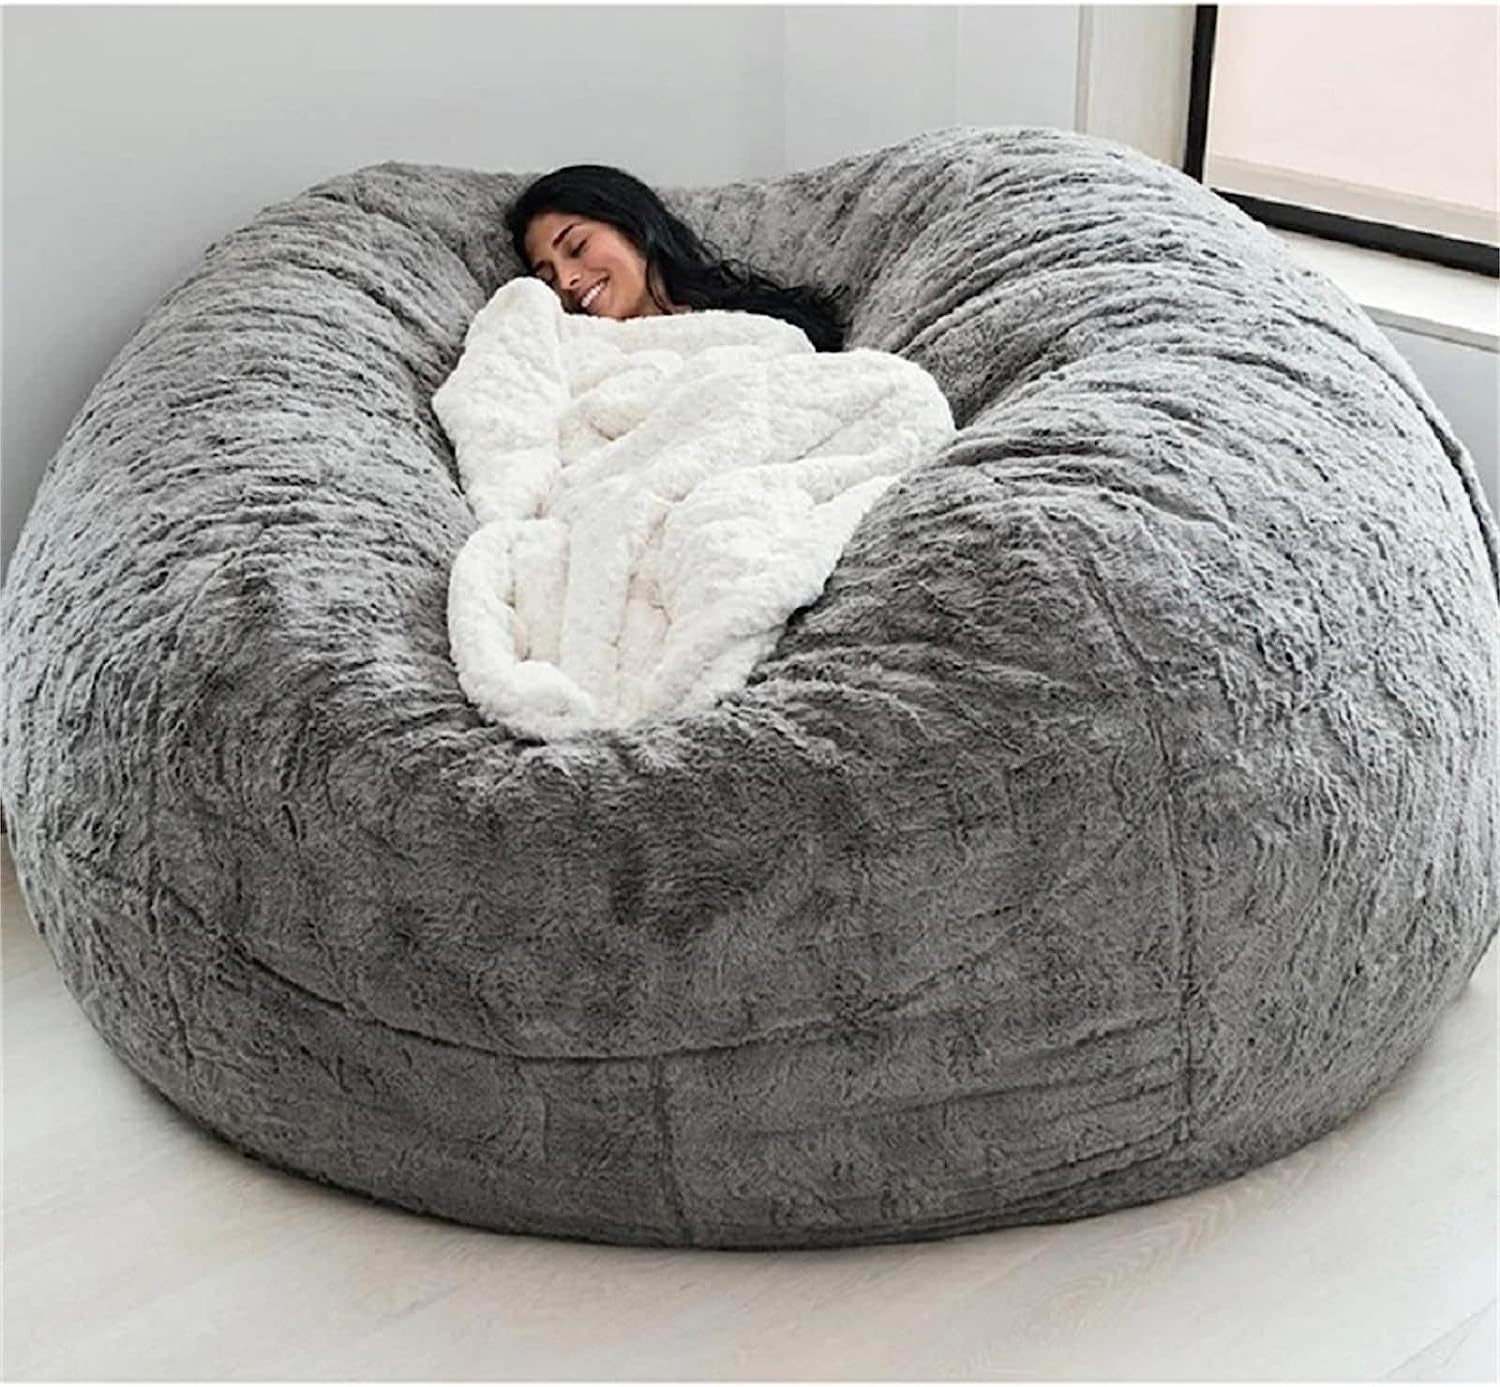 Primary image for Giant Fur Bean Bag Chair Cover For Kids Adults, (No Filler), Light Grey, 5Ft